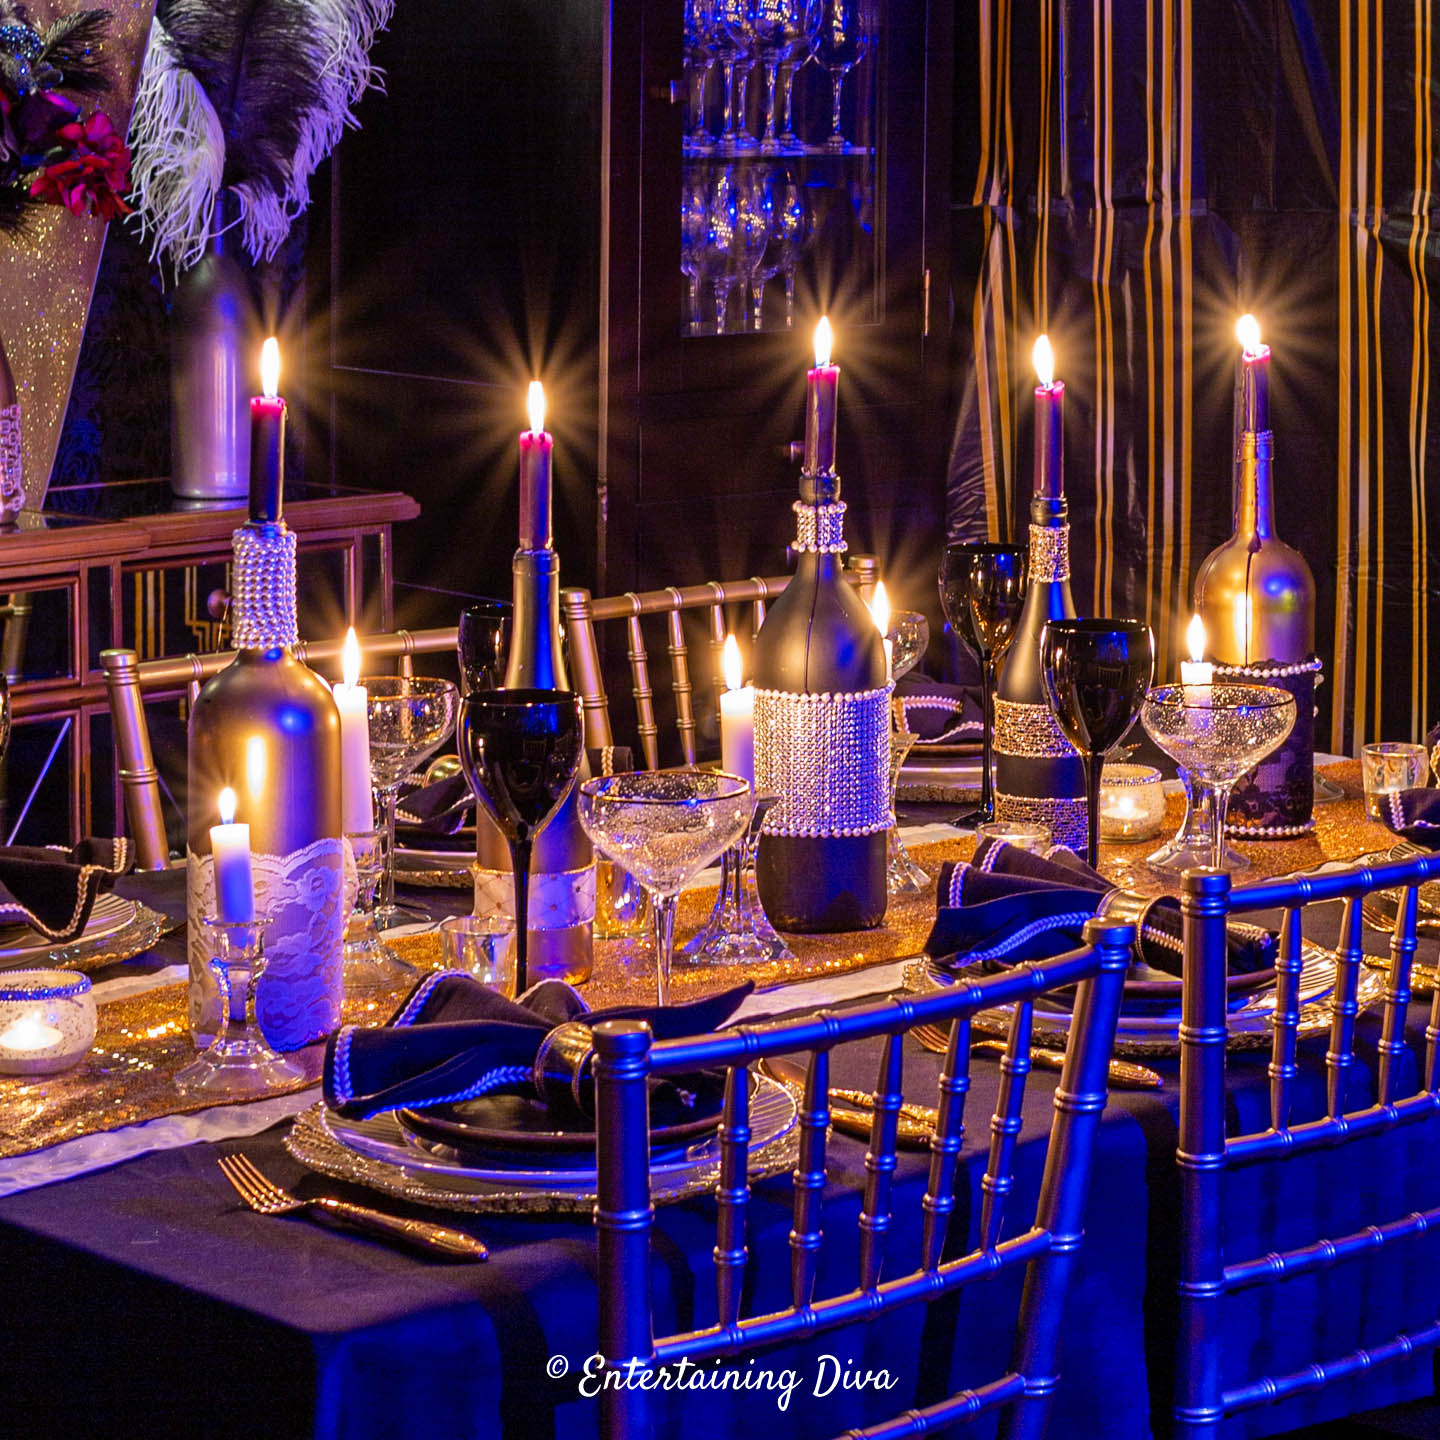 DIY wine bottles used as candle holders in a centerpiece on a Great Gatsby party tablescape